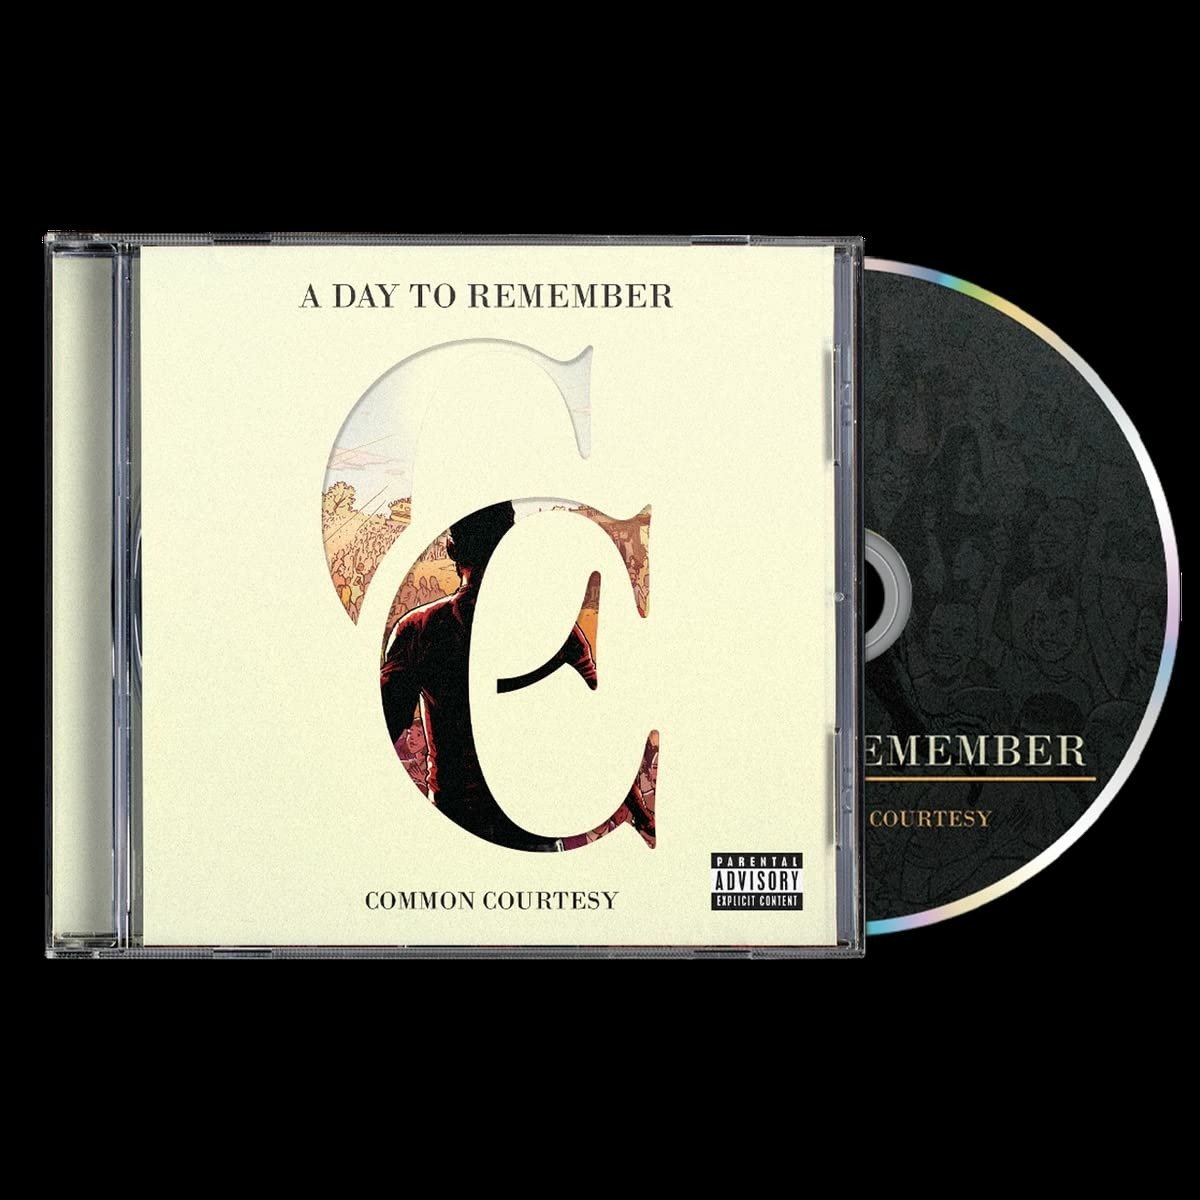 CD Shop - A DAY TO REMEMBER COMMON COURTESY